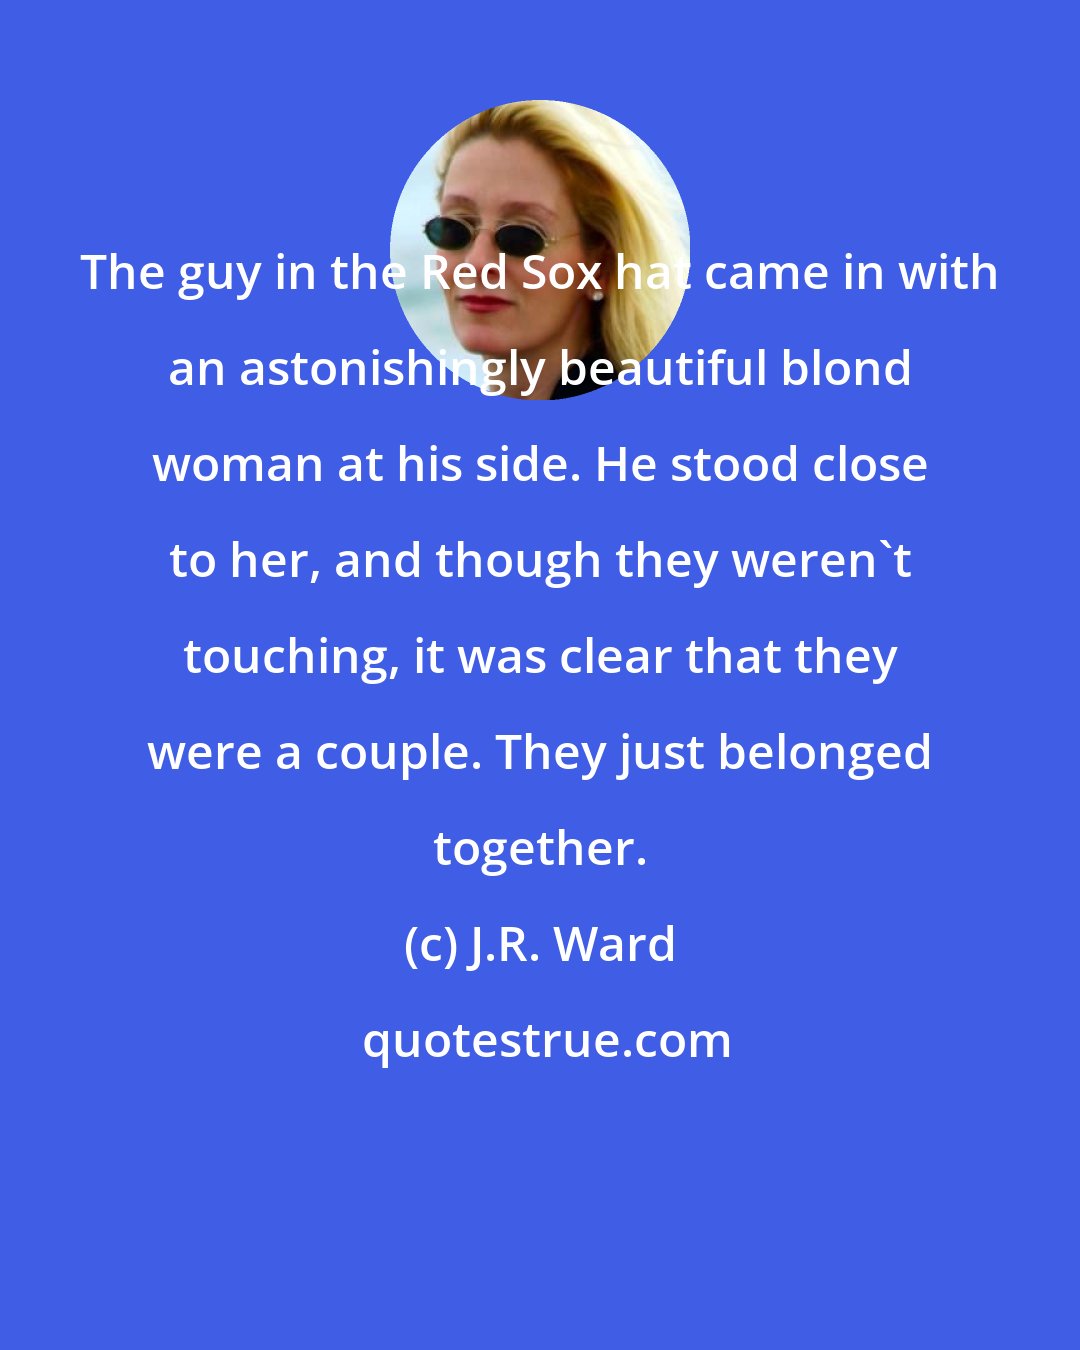 J.R. Ward: The guy in the Red Sox hat came in with an astonishingly beautiful blond woman at his side. He stood close to her, and though they weren't touching, it was clear that they were a couple. They just belonged together.